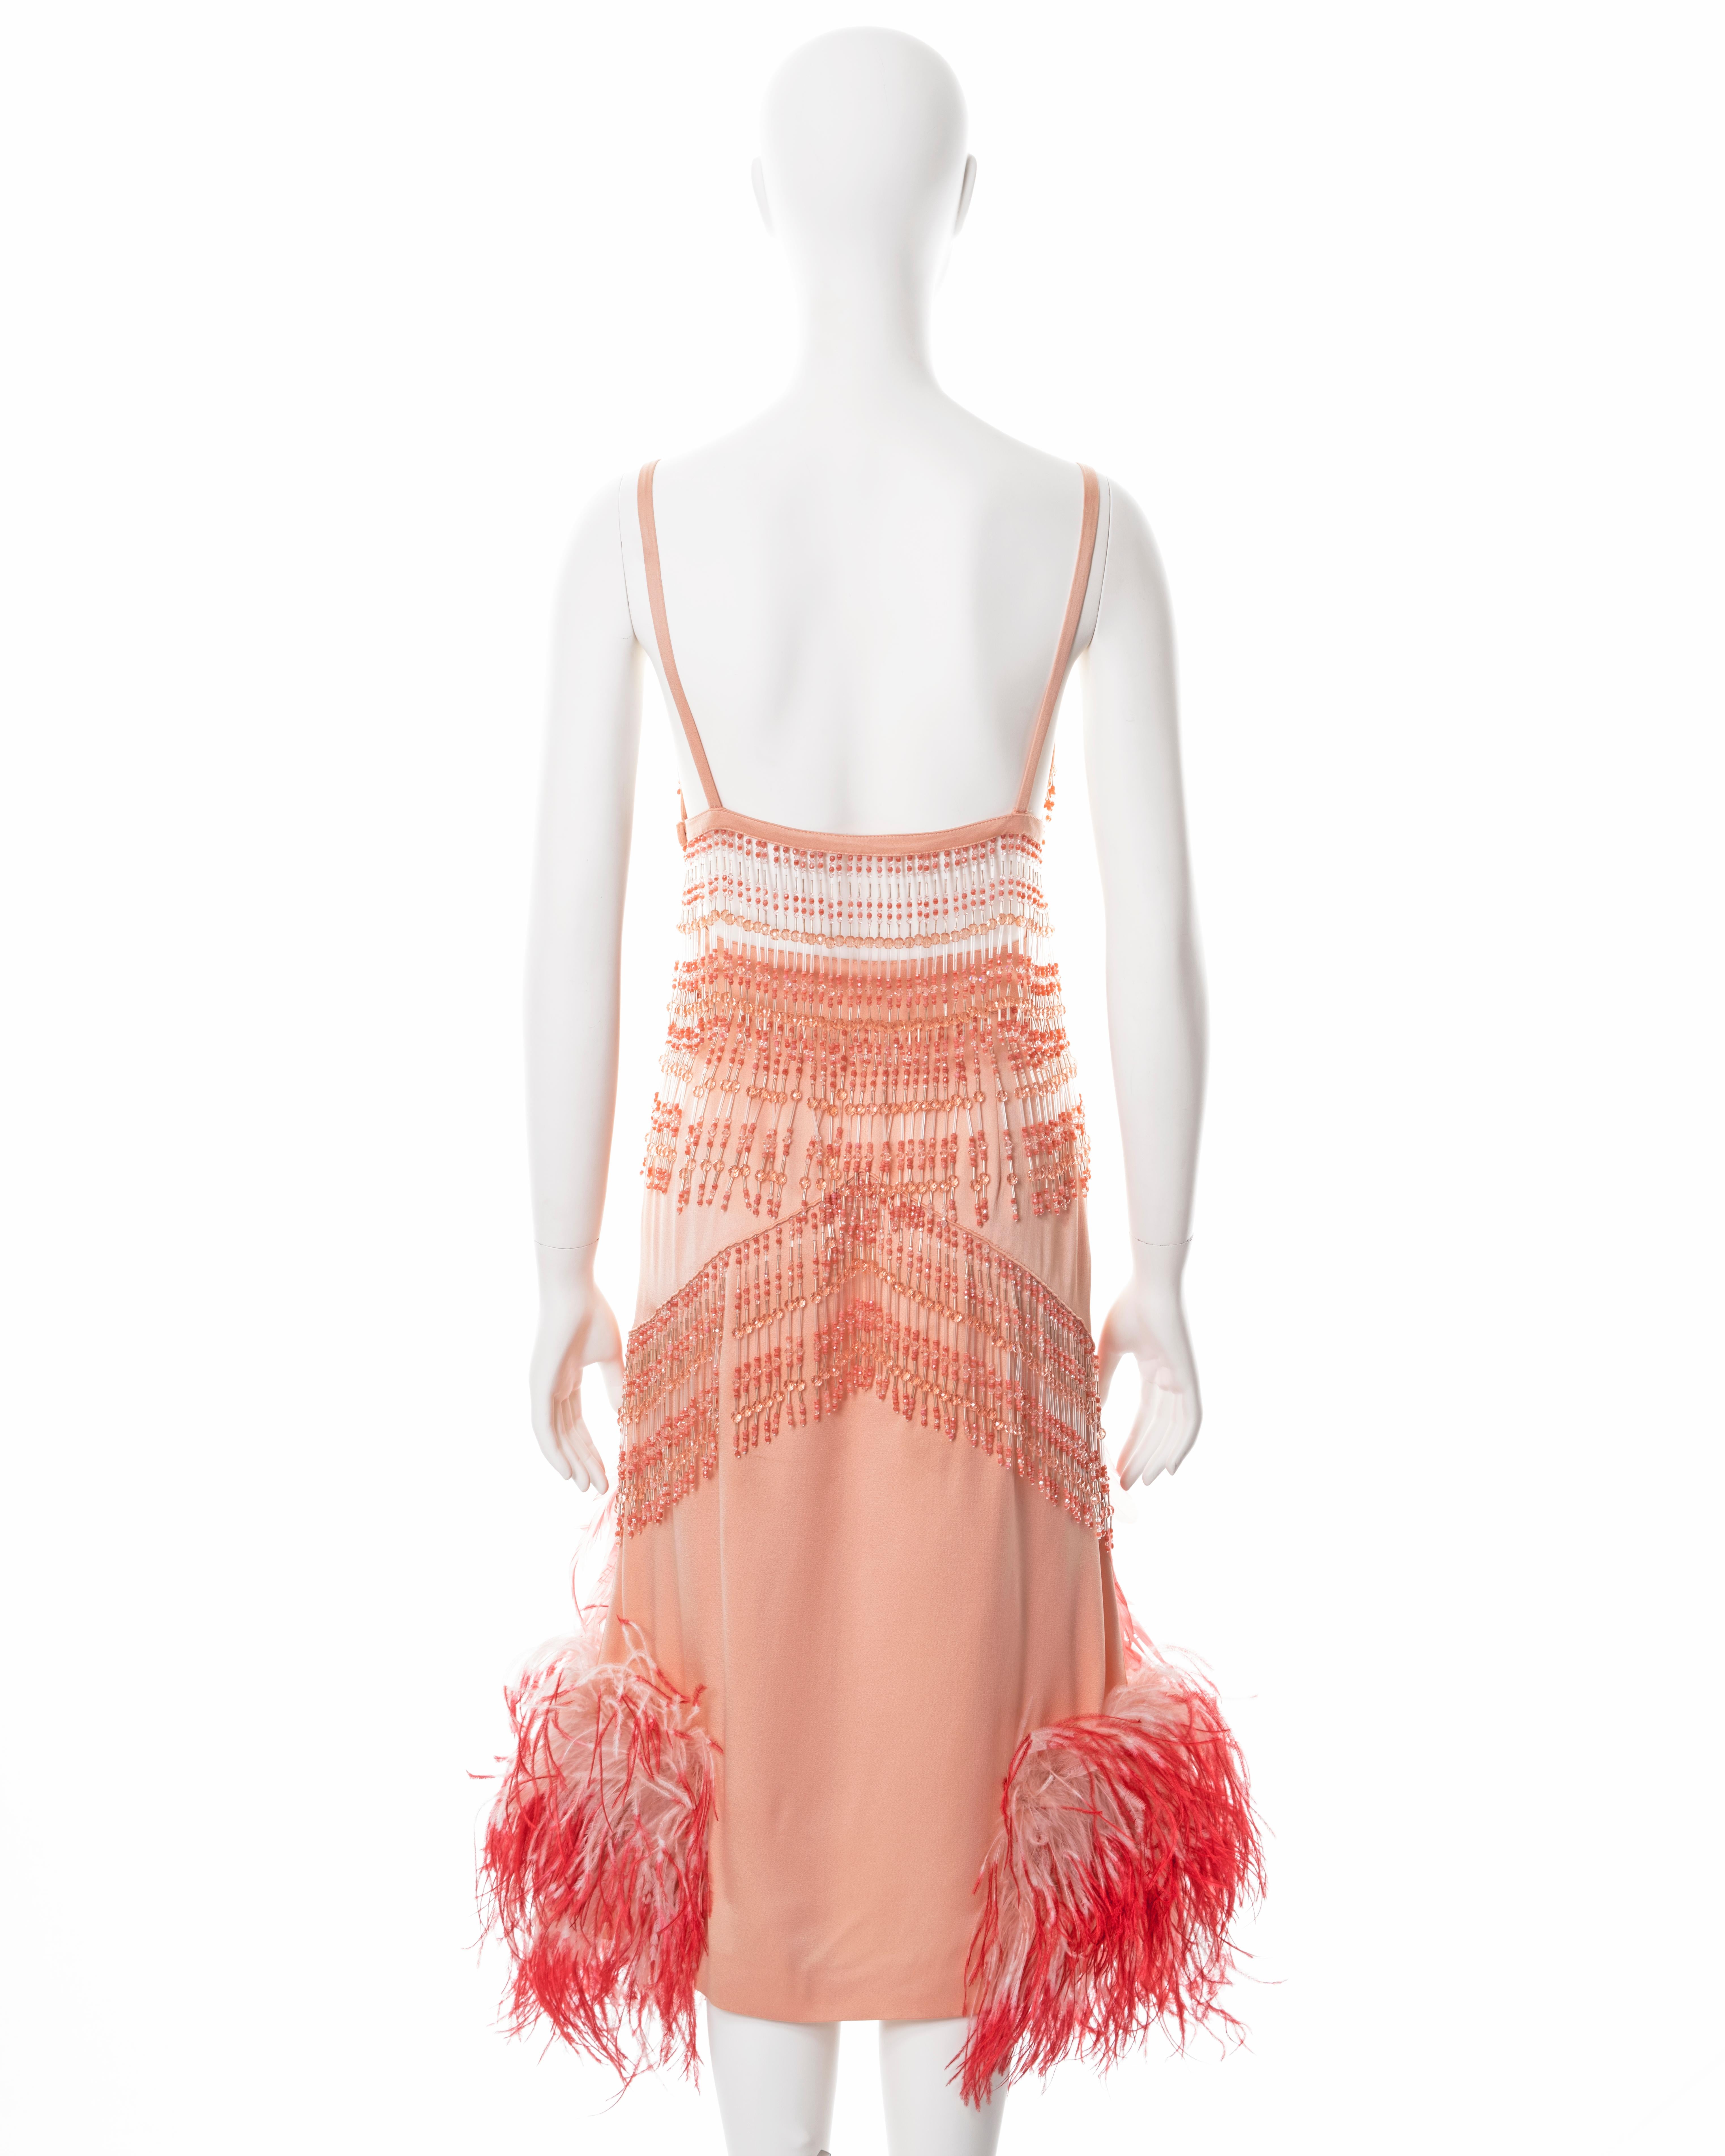 Prada pink silk feather embellished bra and skirt with beaded fringe, fw 2017 For Sale 8